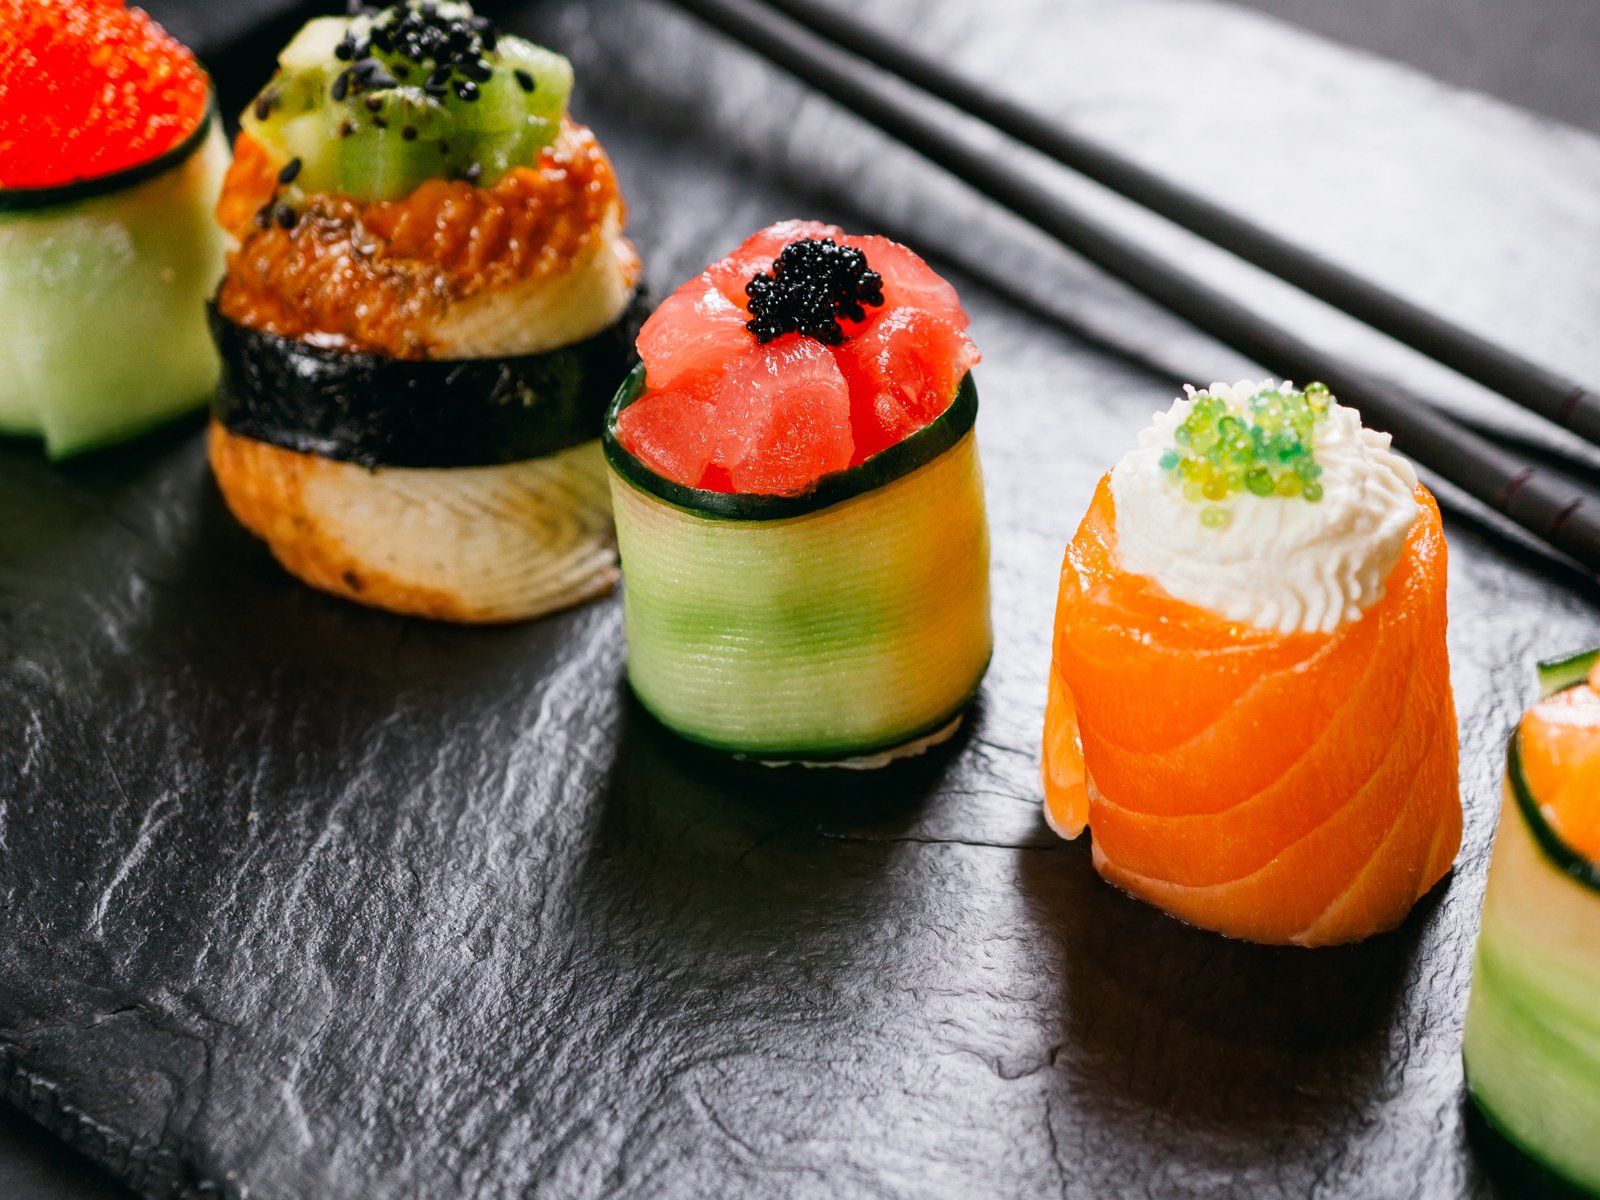 Top sushi places outside Japan.

